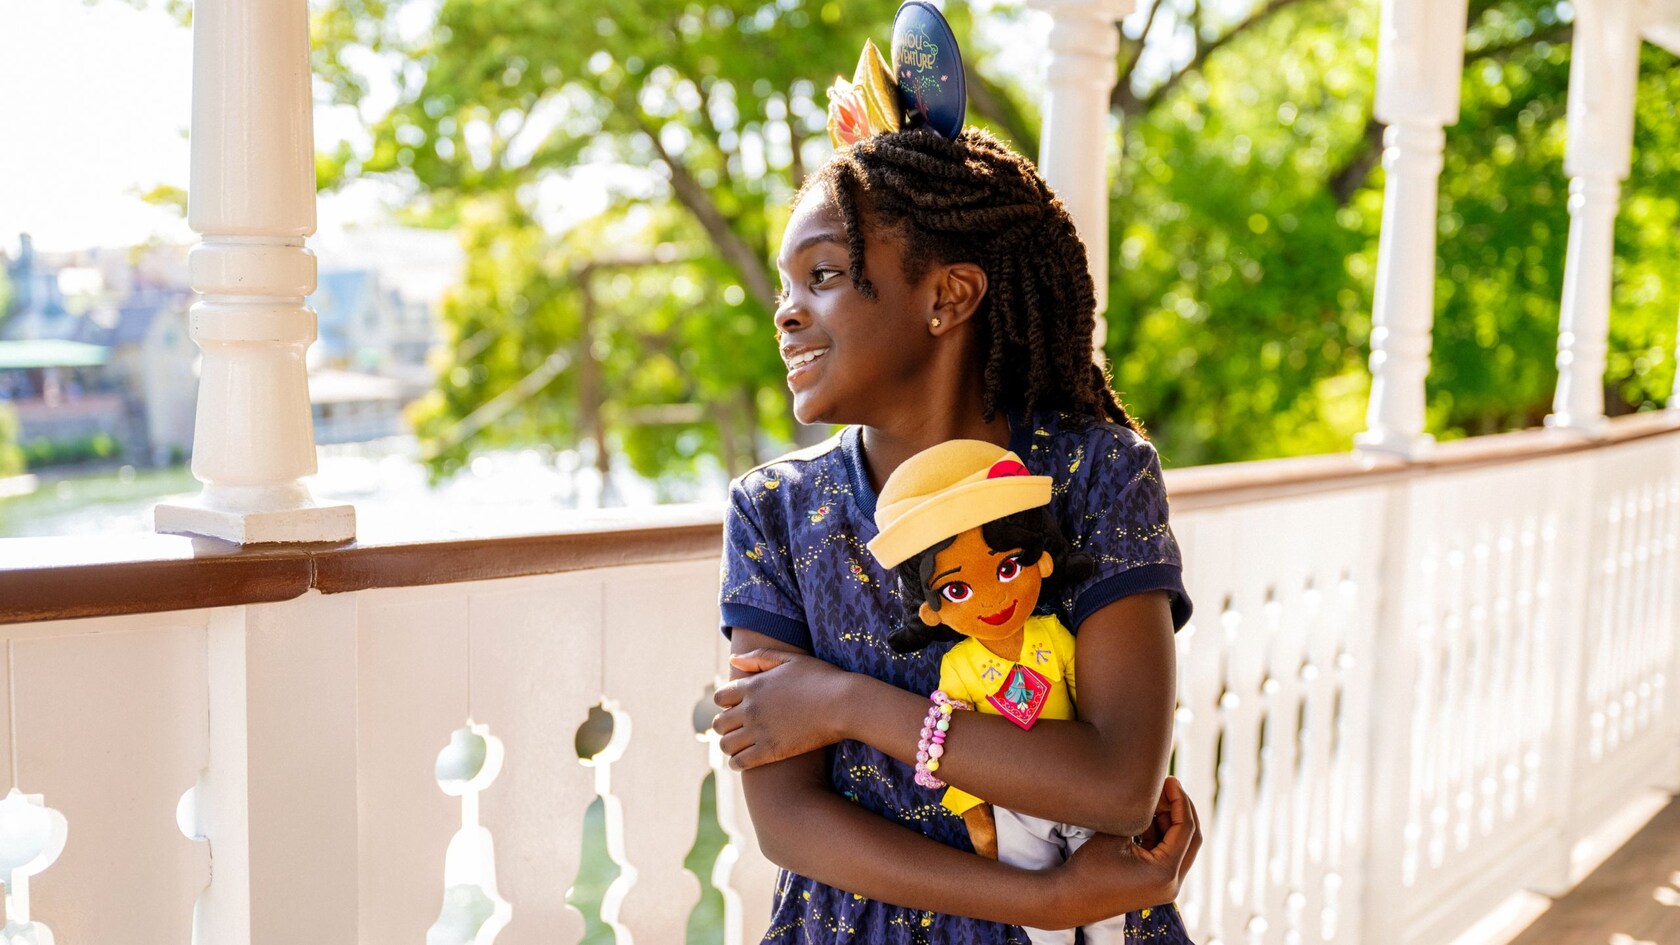 A girl hugging a Tiana plush doll while wearing a Tiana’s Bayou Adventure Ear Headband and a dress featuring Ray from ′The Princess and the Frog′